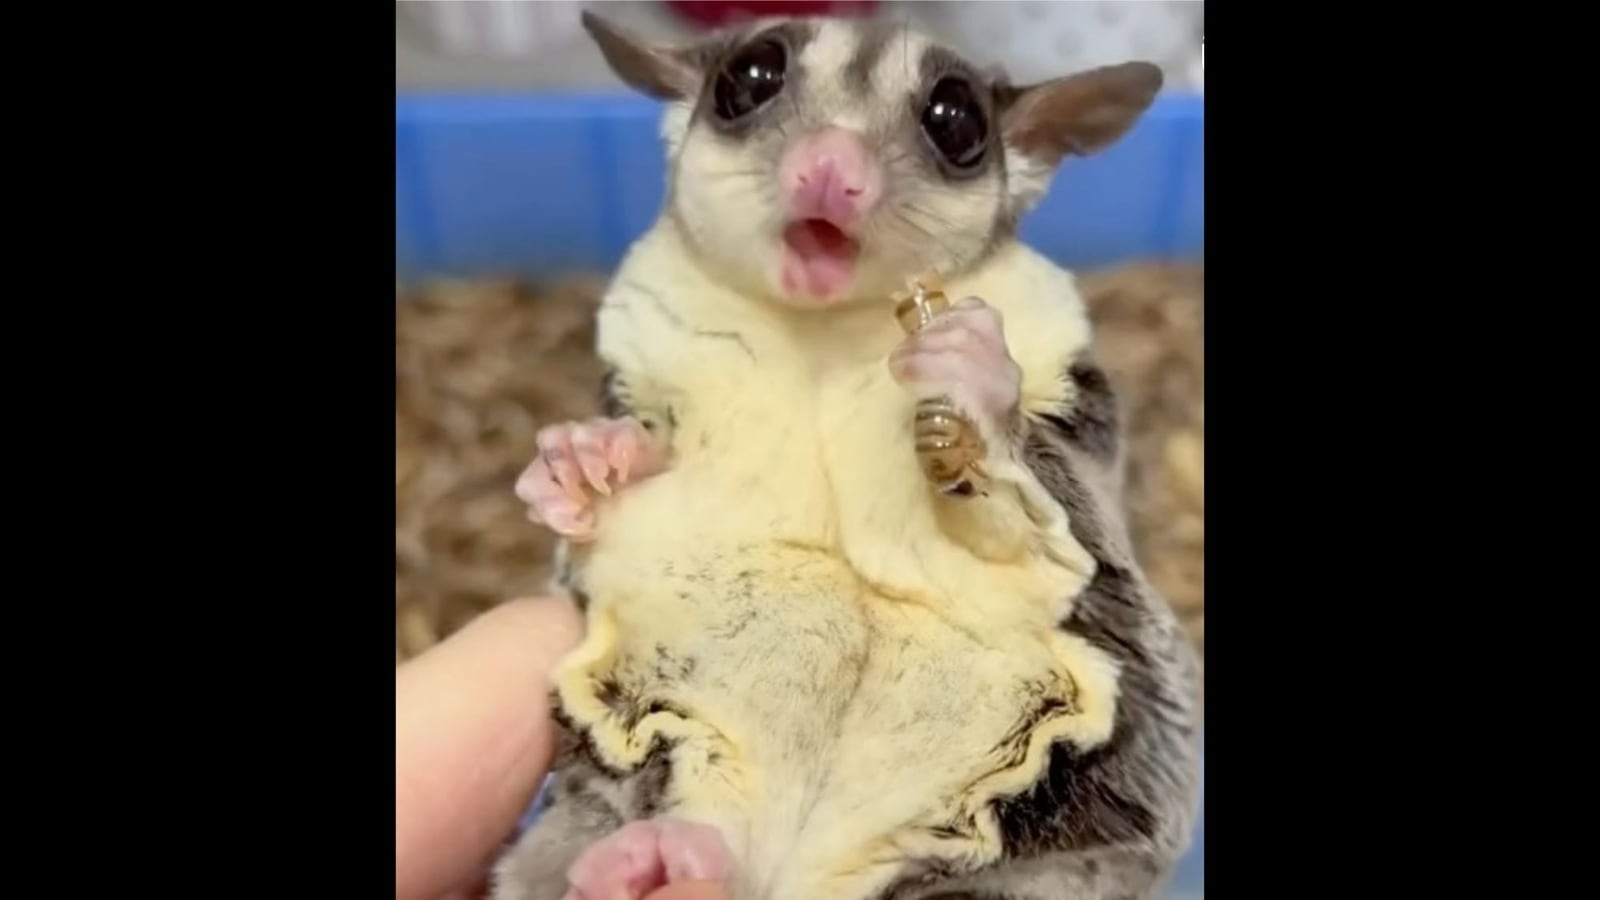 Video of pet sugar glider eating worms is oddly cute. Watch ...